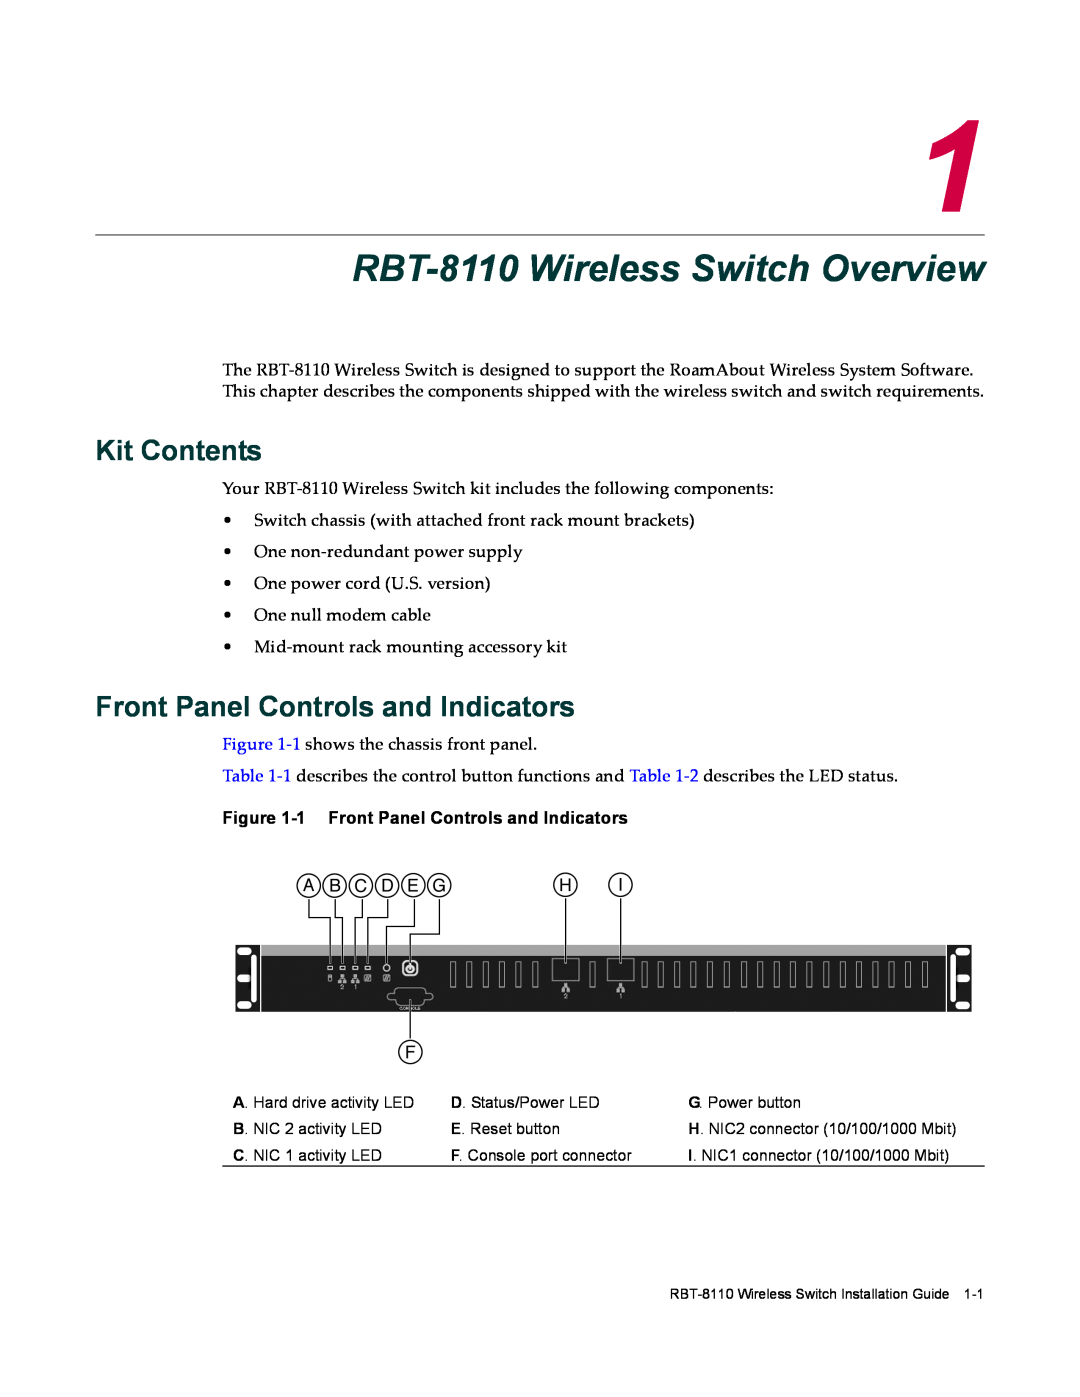 Enterasys Networks manual RBT-8110 Wireless Switch Overview, Kit Contents, Front Panel Controls and Indicators 